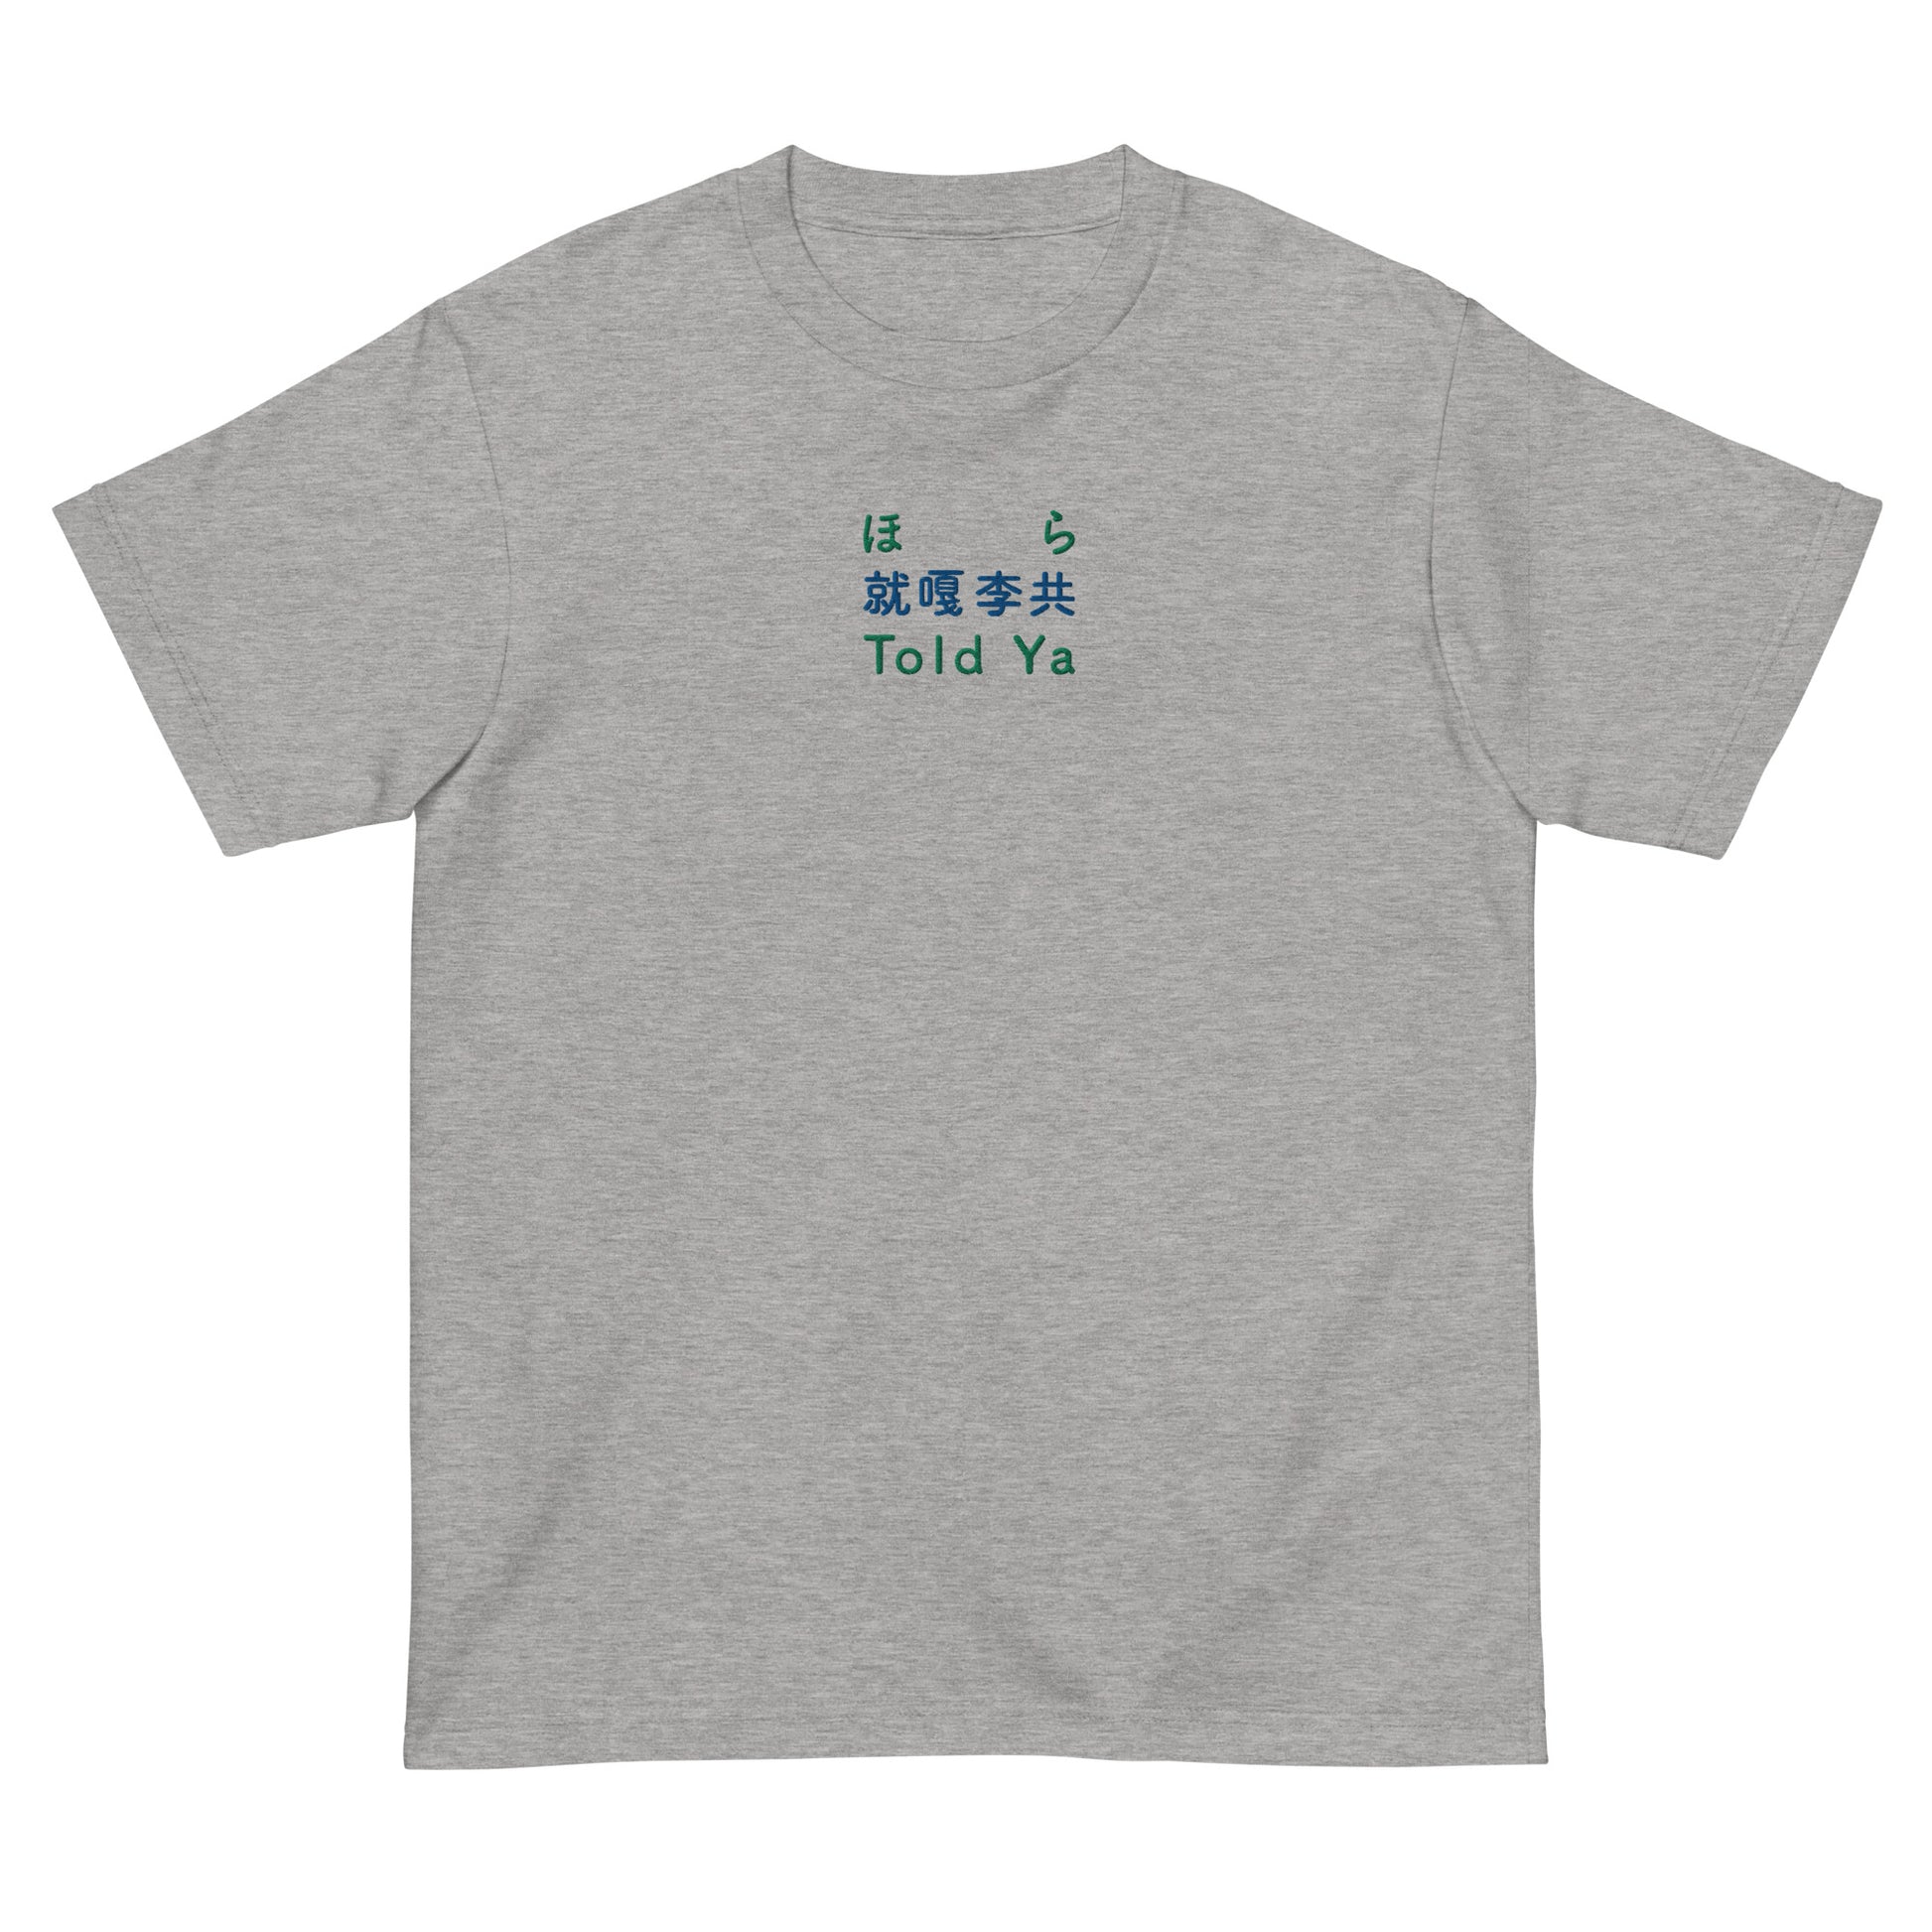 Light Gray High Quality Tee - Front Design with an Blue,Green Embroidery "Told Ya" in Japanese,Chinese and English